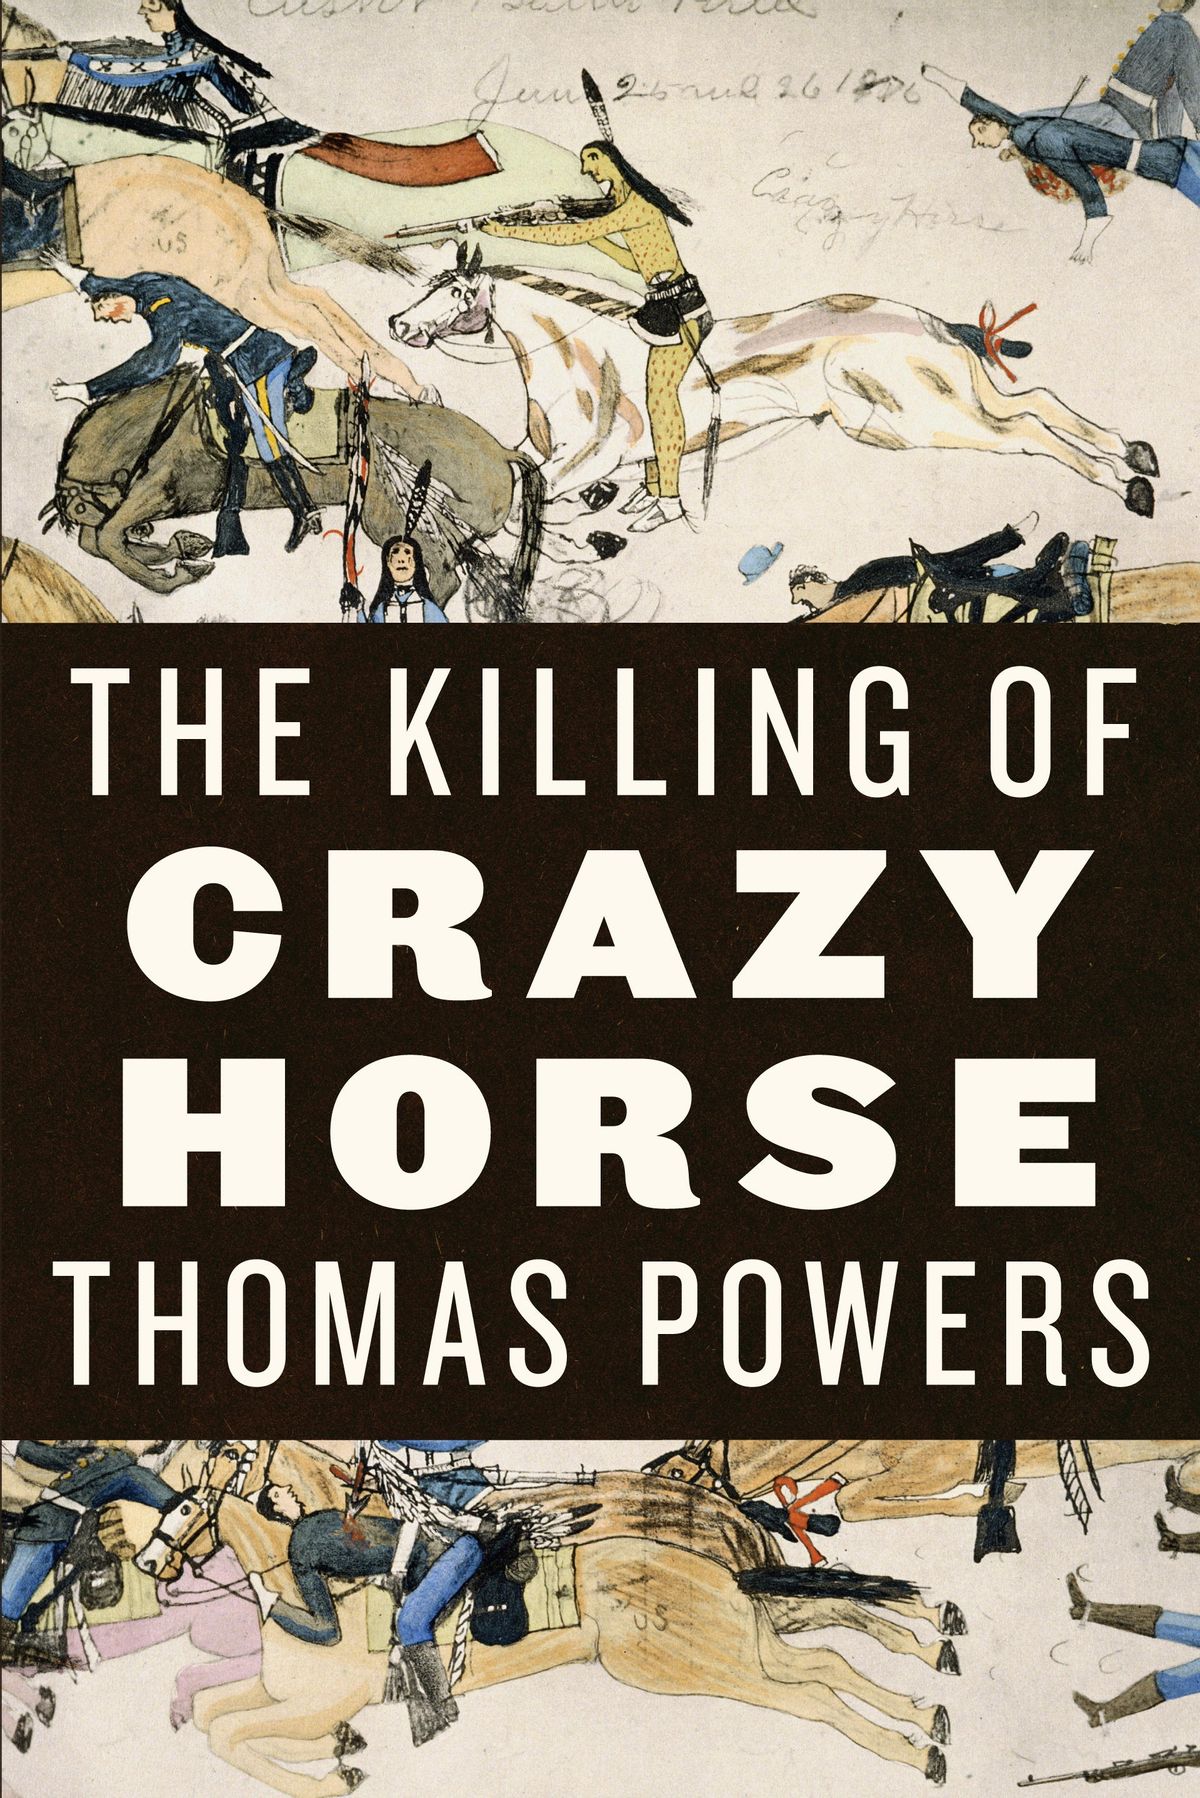 "The Killing of Crazy Horse" by Thomas Powers 